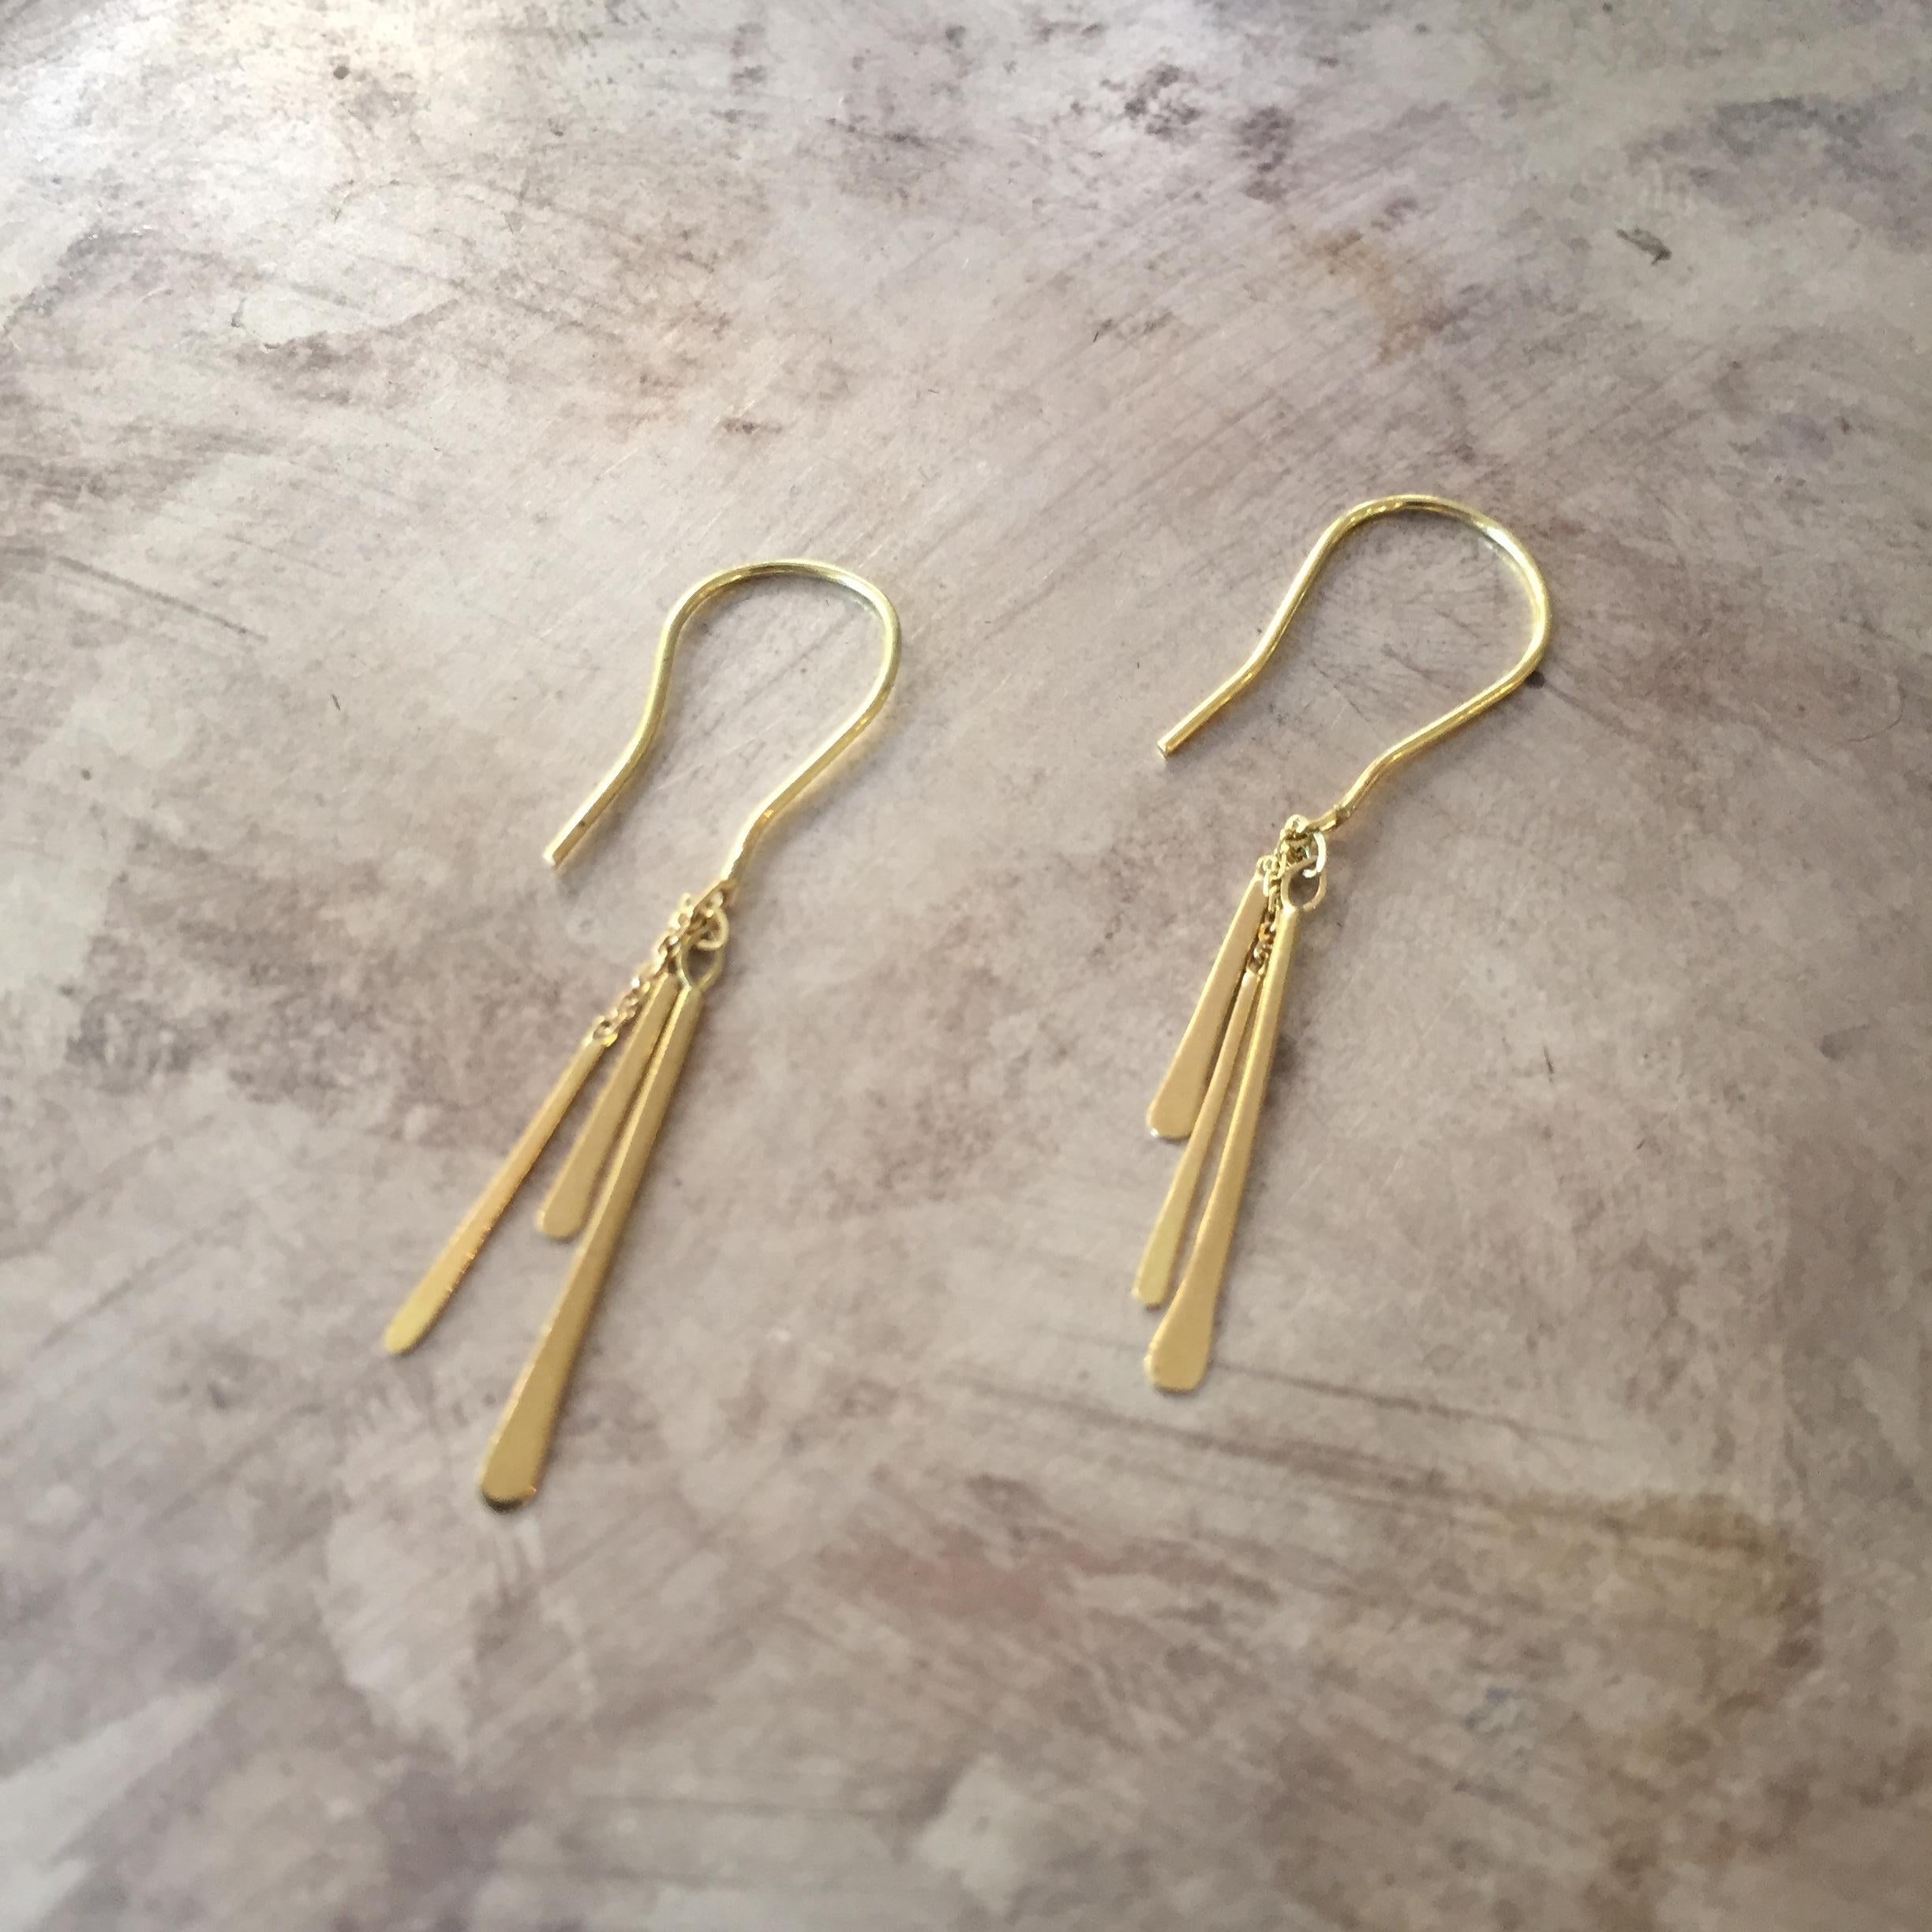 Handmade from 18k yellow gold, these super cute hook earrings are 3cm long overall. They have 3 varying length fine gold bars which move playfully and are an easy-to-wear timeless addition to any outfit, day or night! 